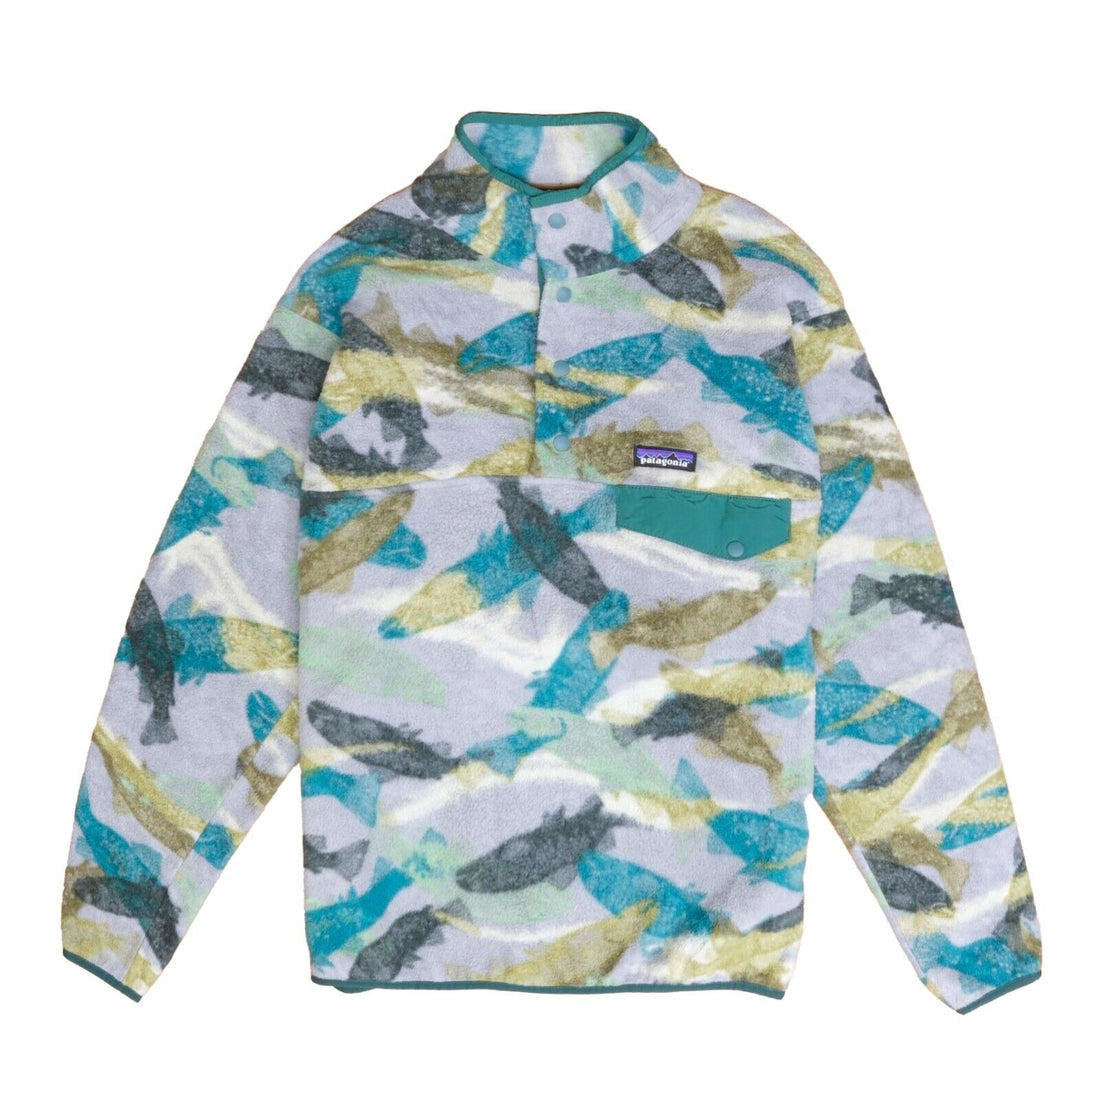 Patagonia Printed Snap-T Fleece Jacket Size Small Trout Tails Synchilla